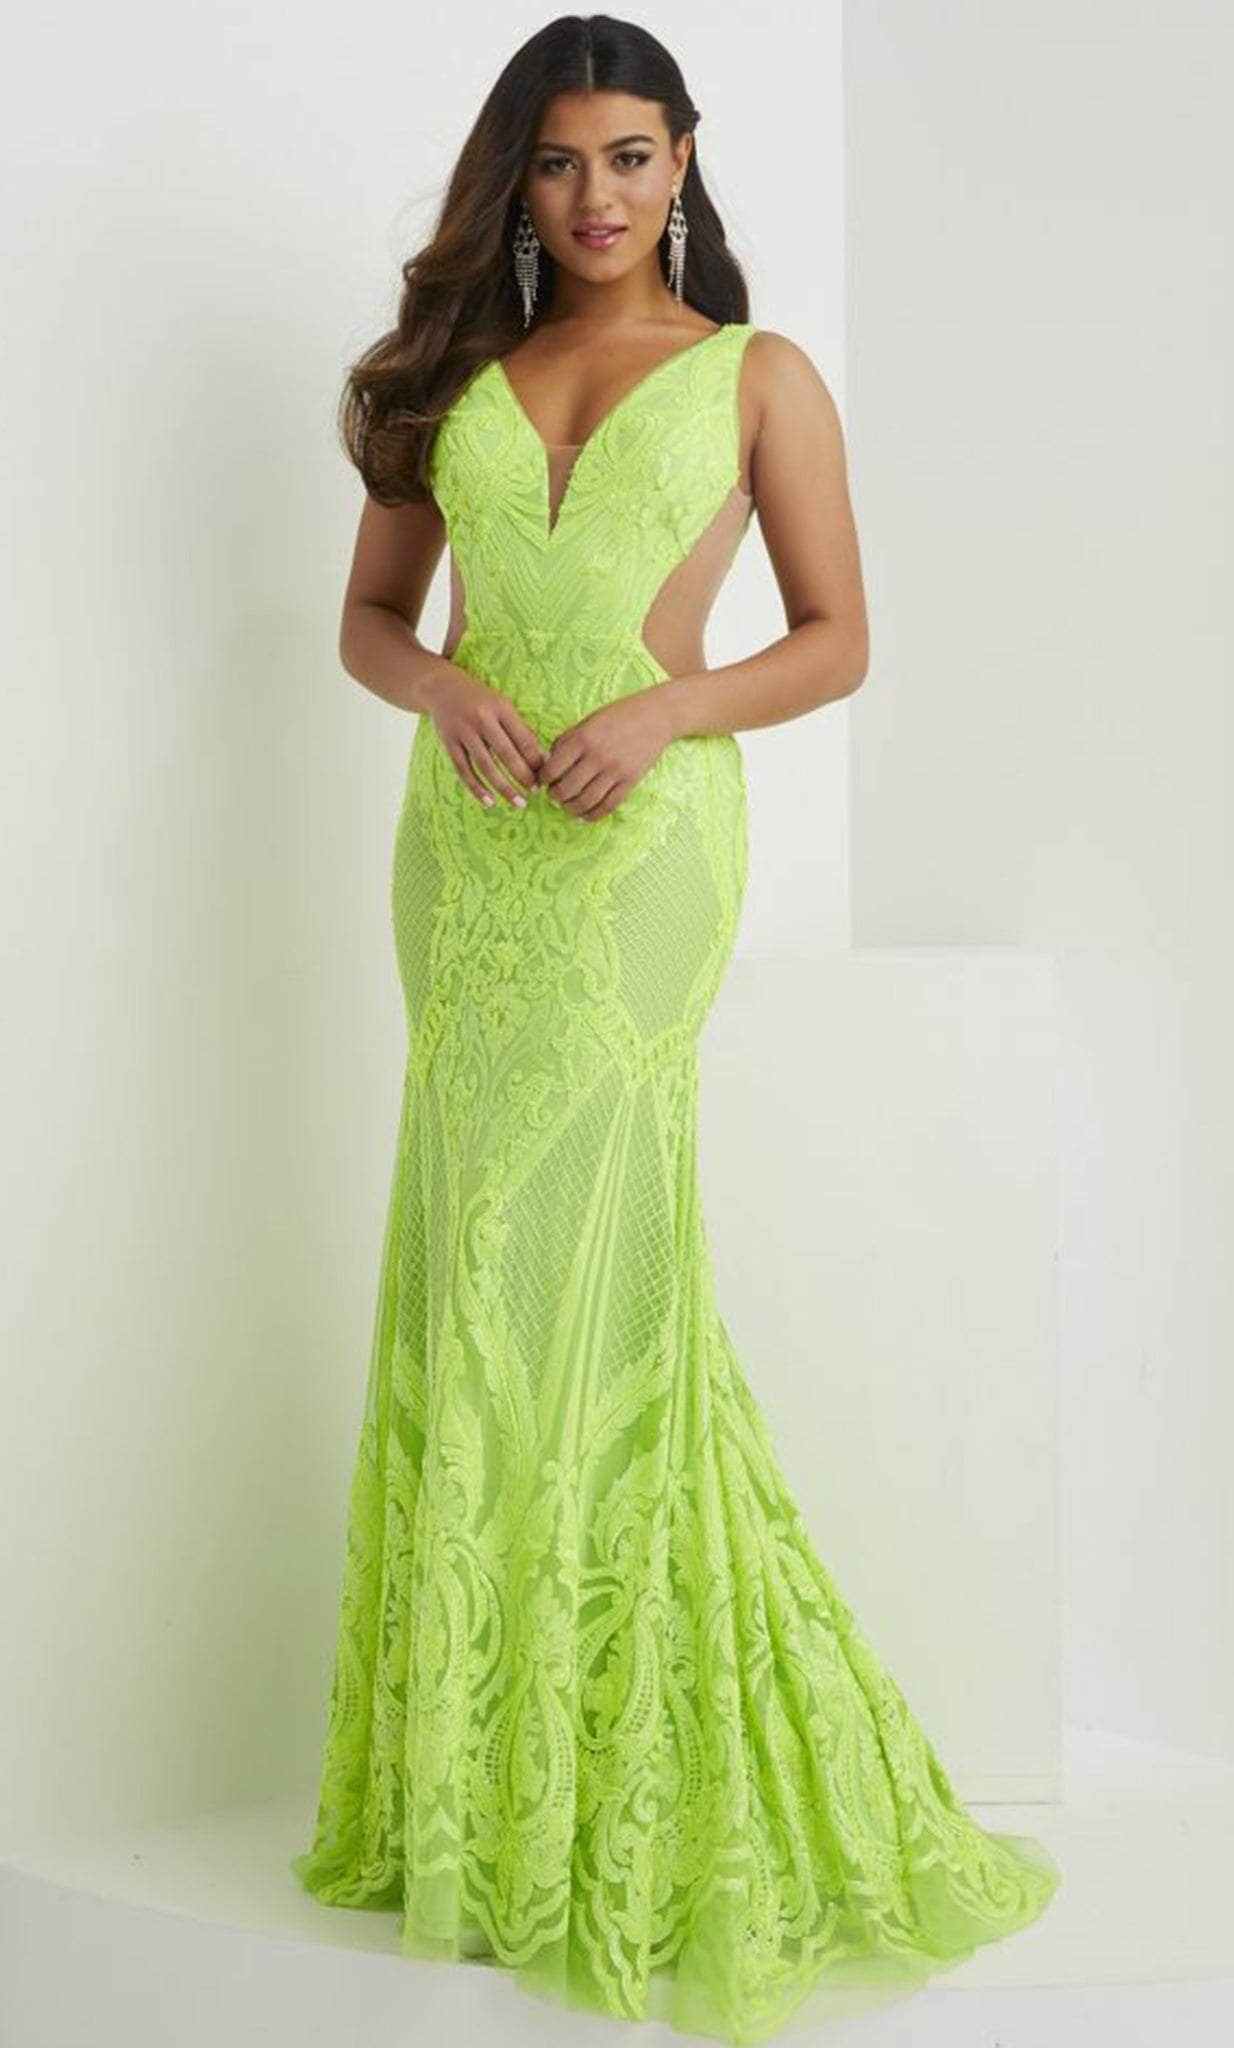 Image of Panoply 14142 - Sequined V-Neck Evening Gown